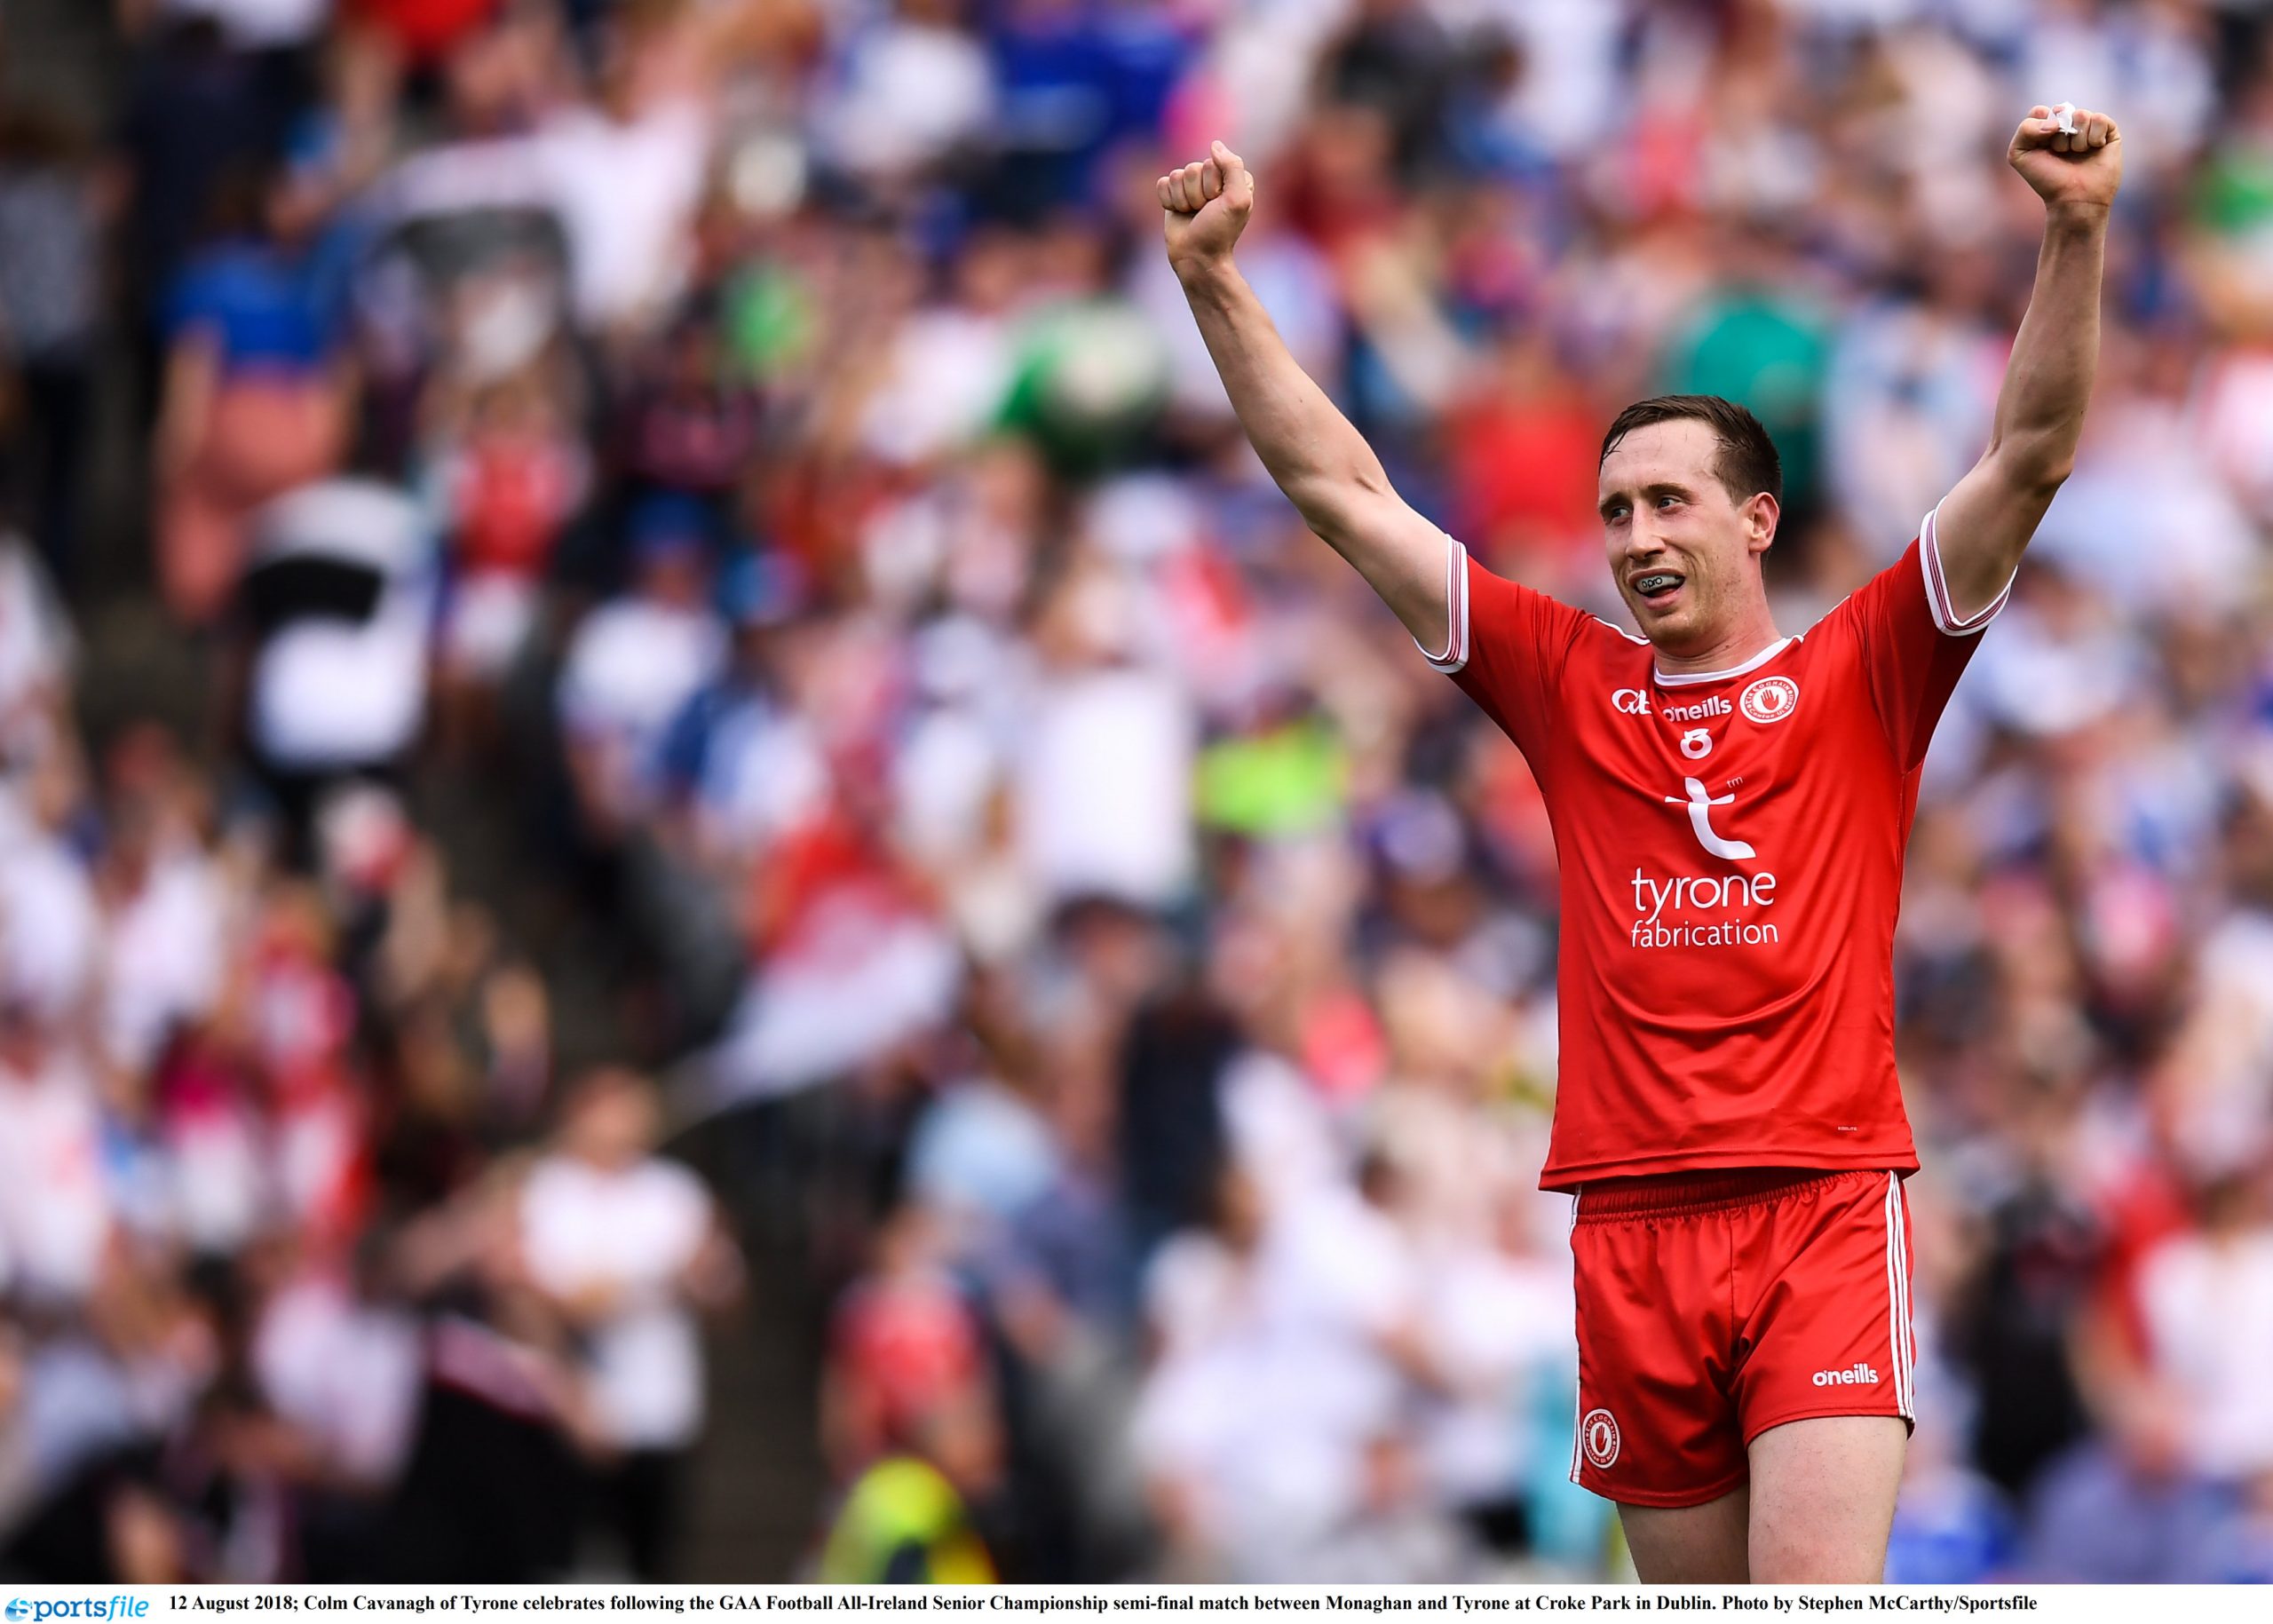 Cavanagh ‘tempted’ by possible return to Tyrone panel